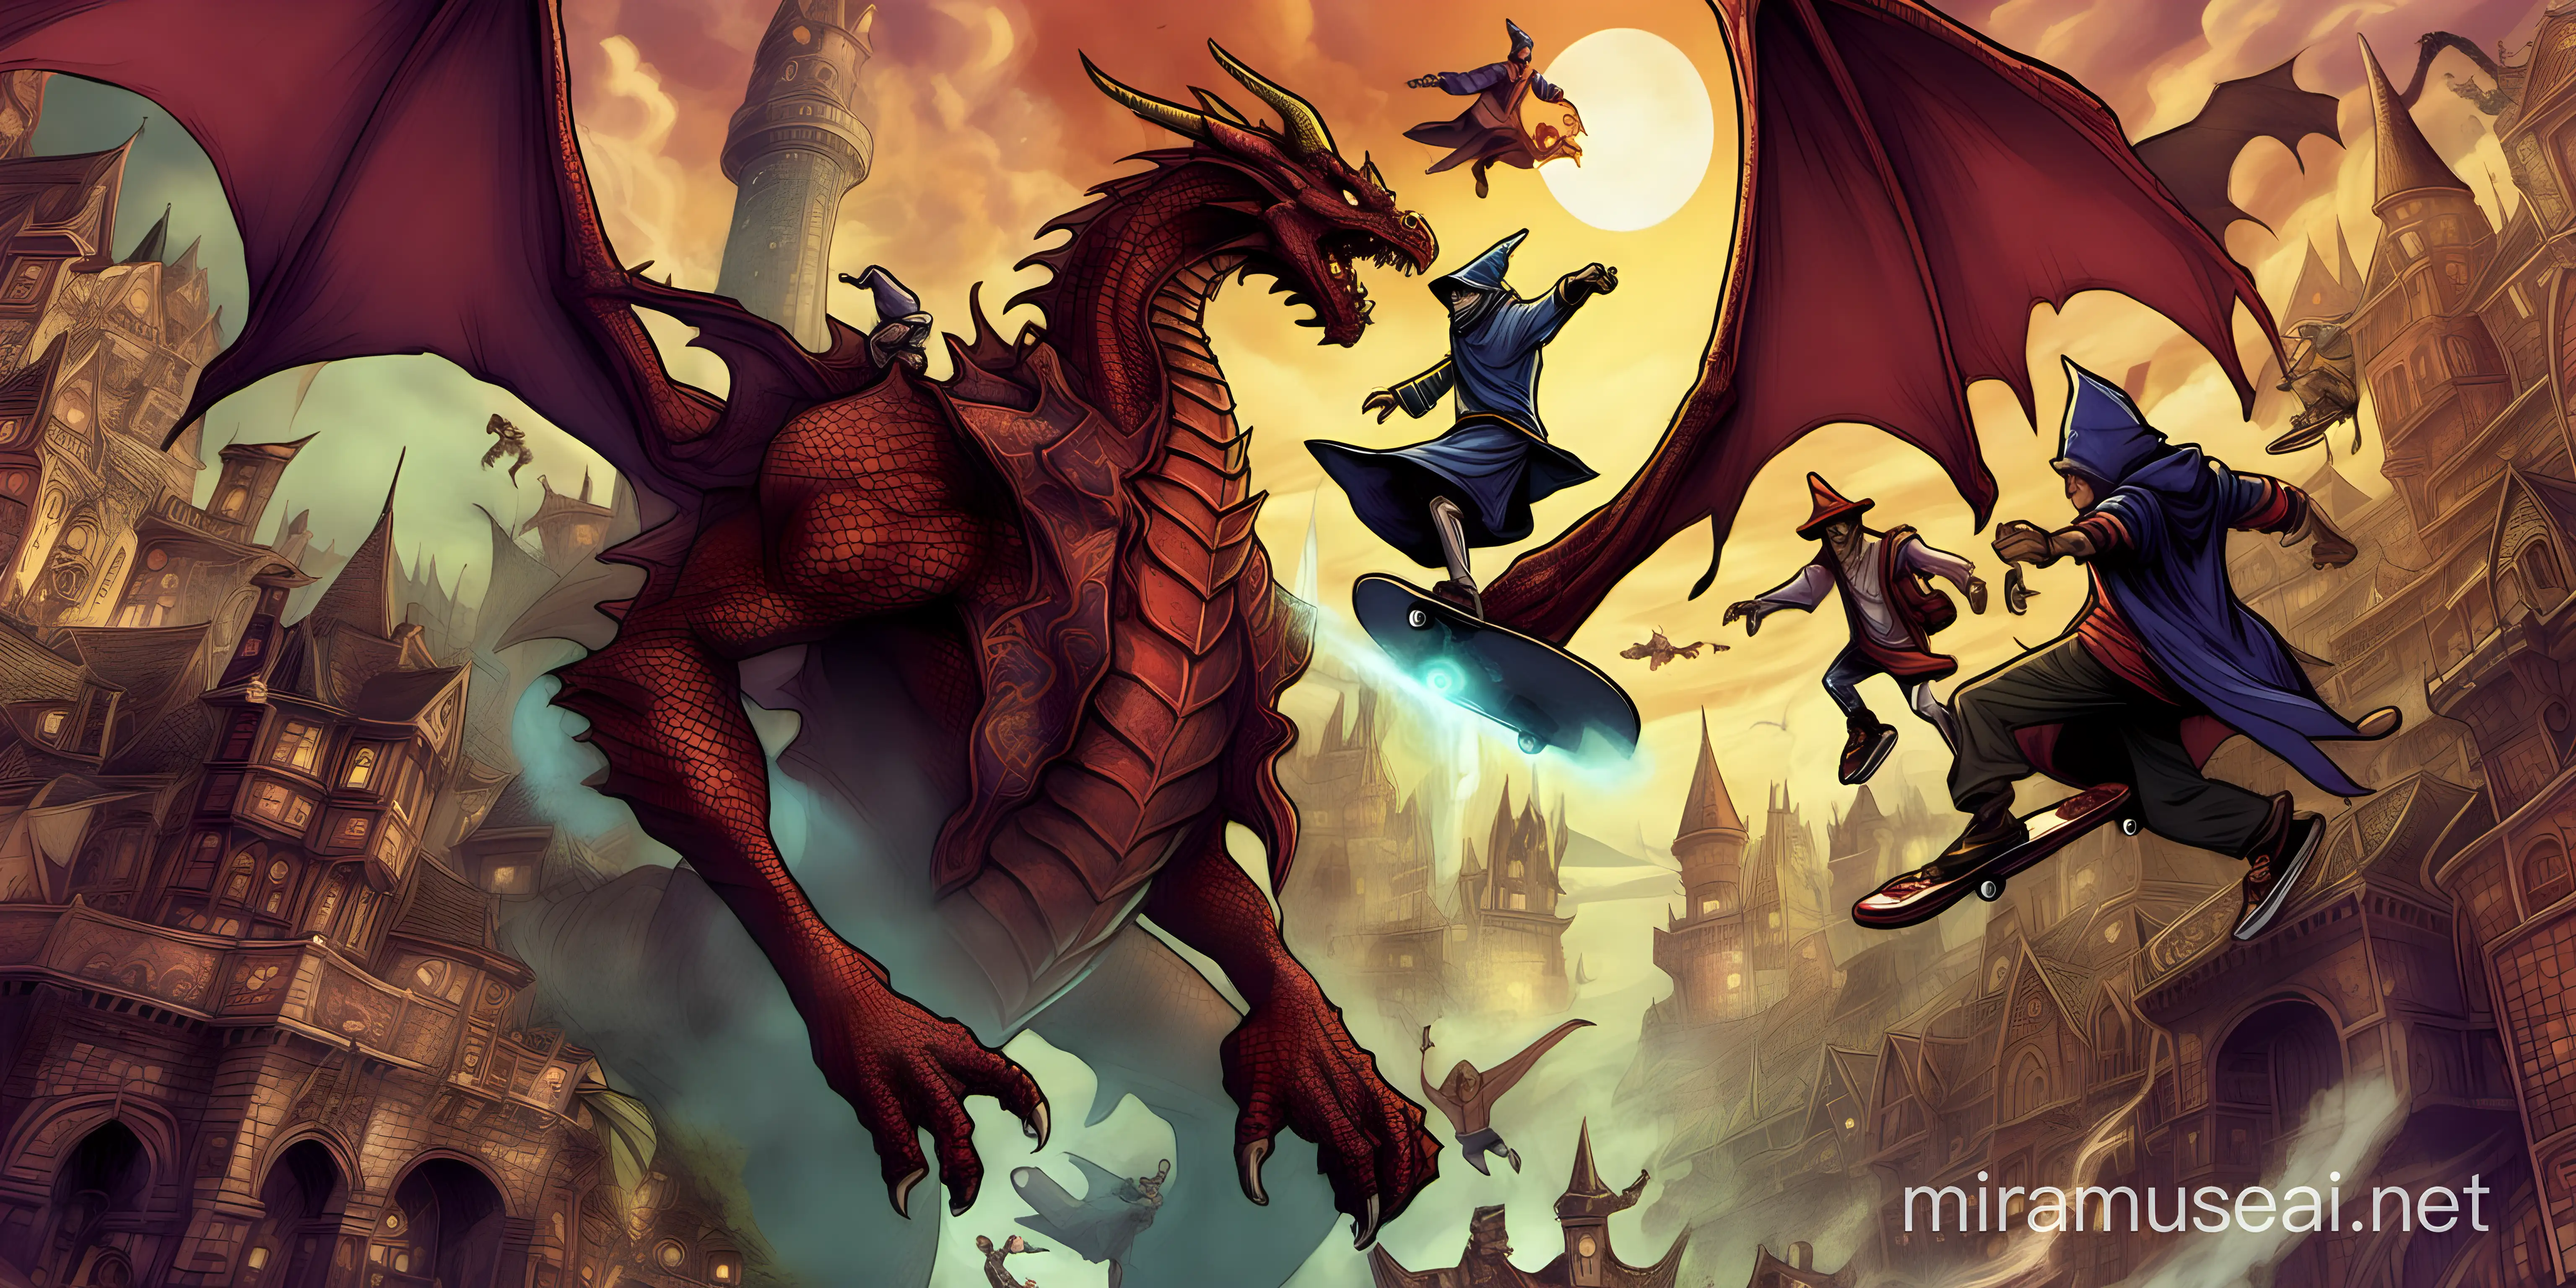 Steam Capsule Banner Art, Wizards in a fantasy world skateboarding towards the villain's kingdom, Evil Dragon King watches over them 